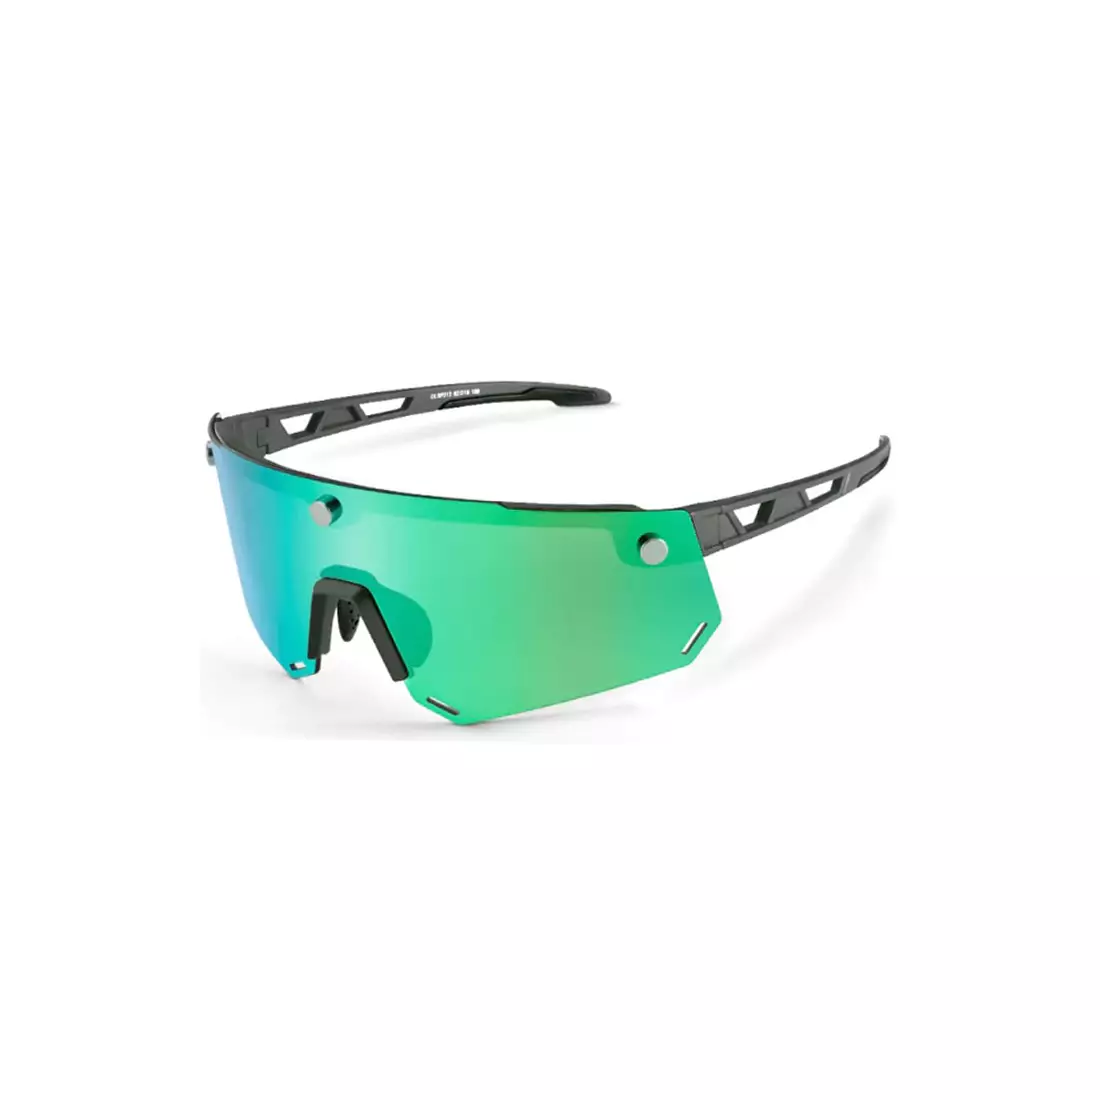 Rockbros SP213GY bicycle / sports glasses with polarized lens black 